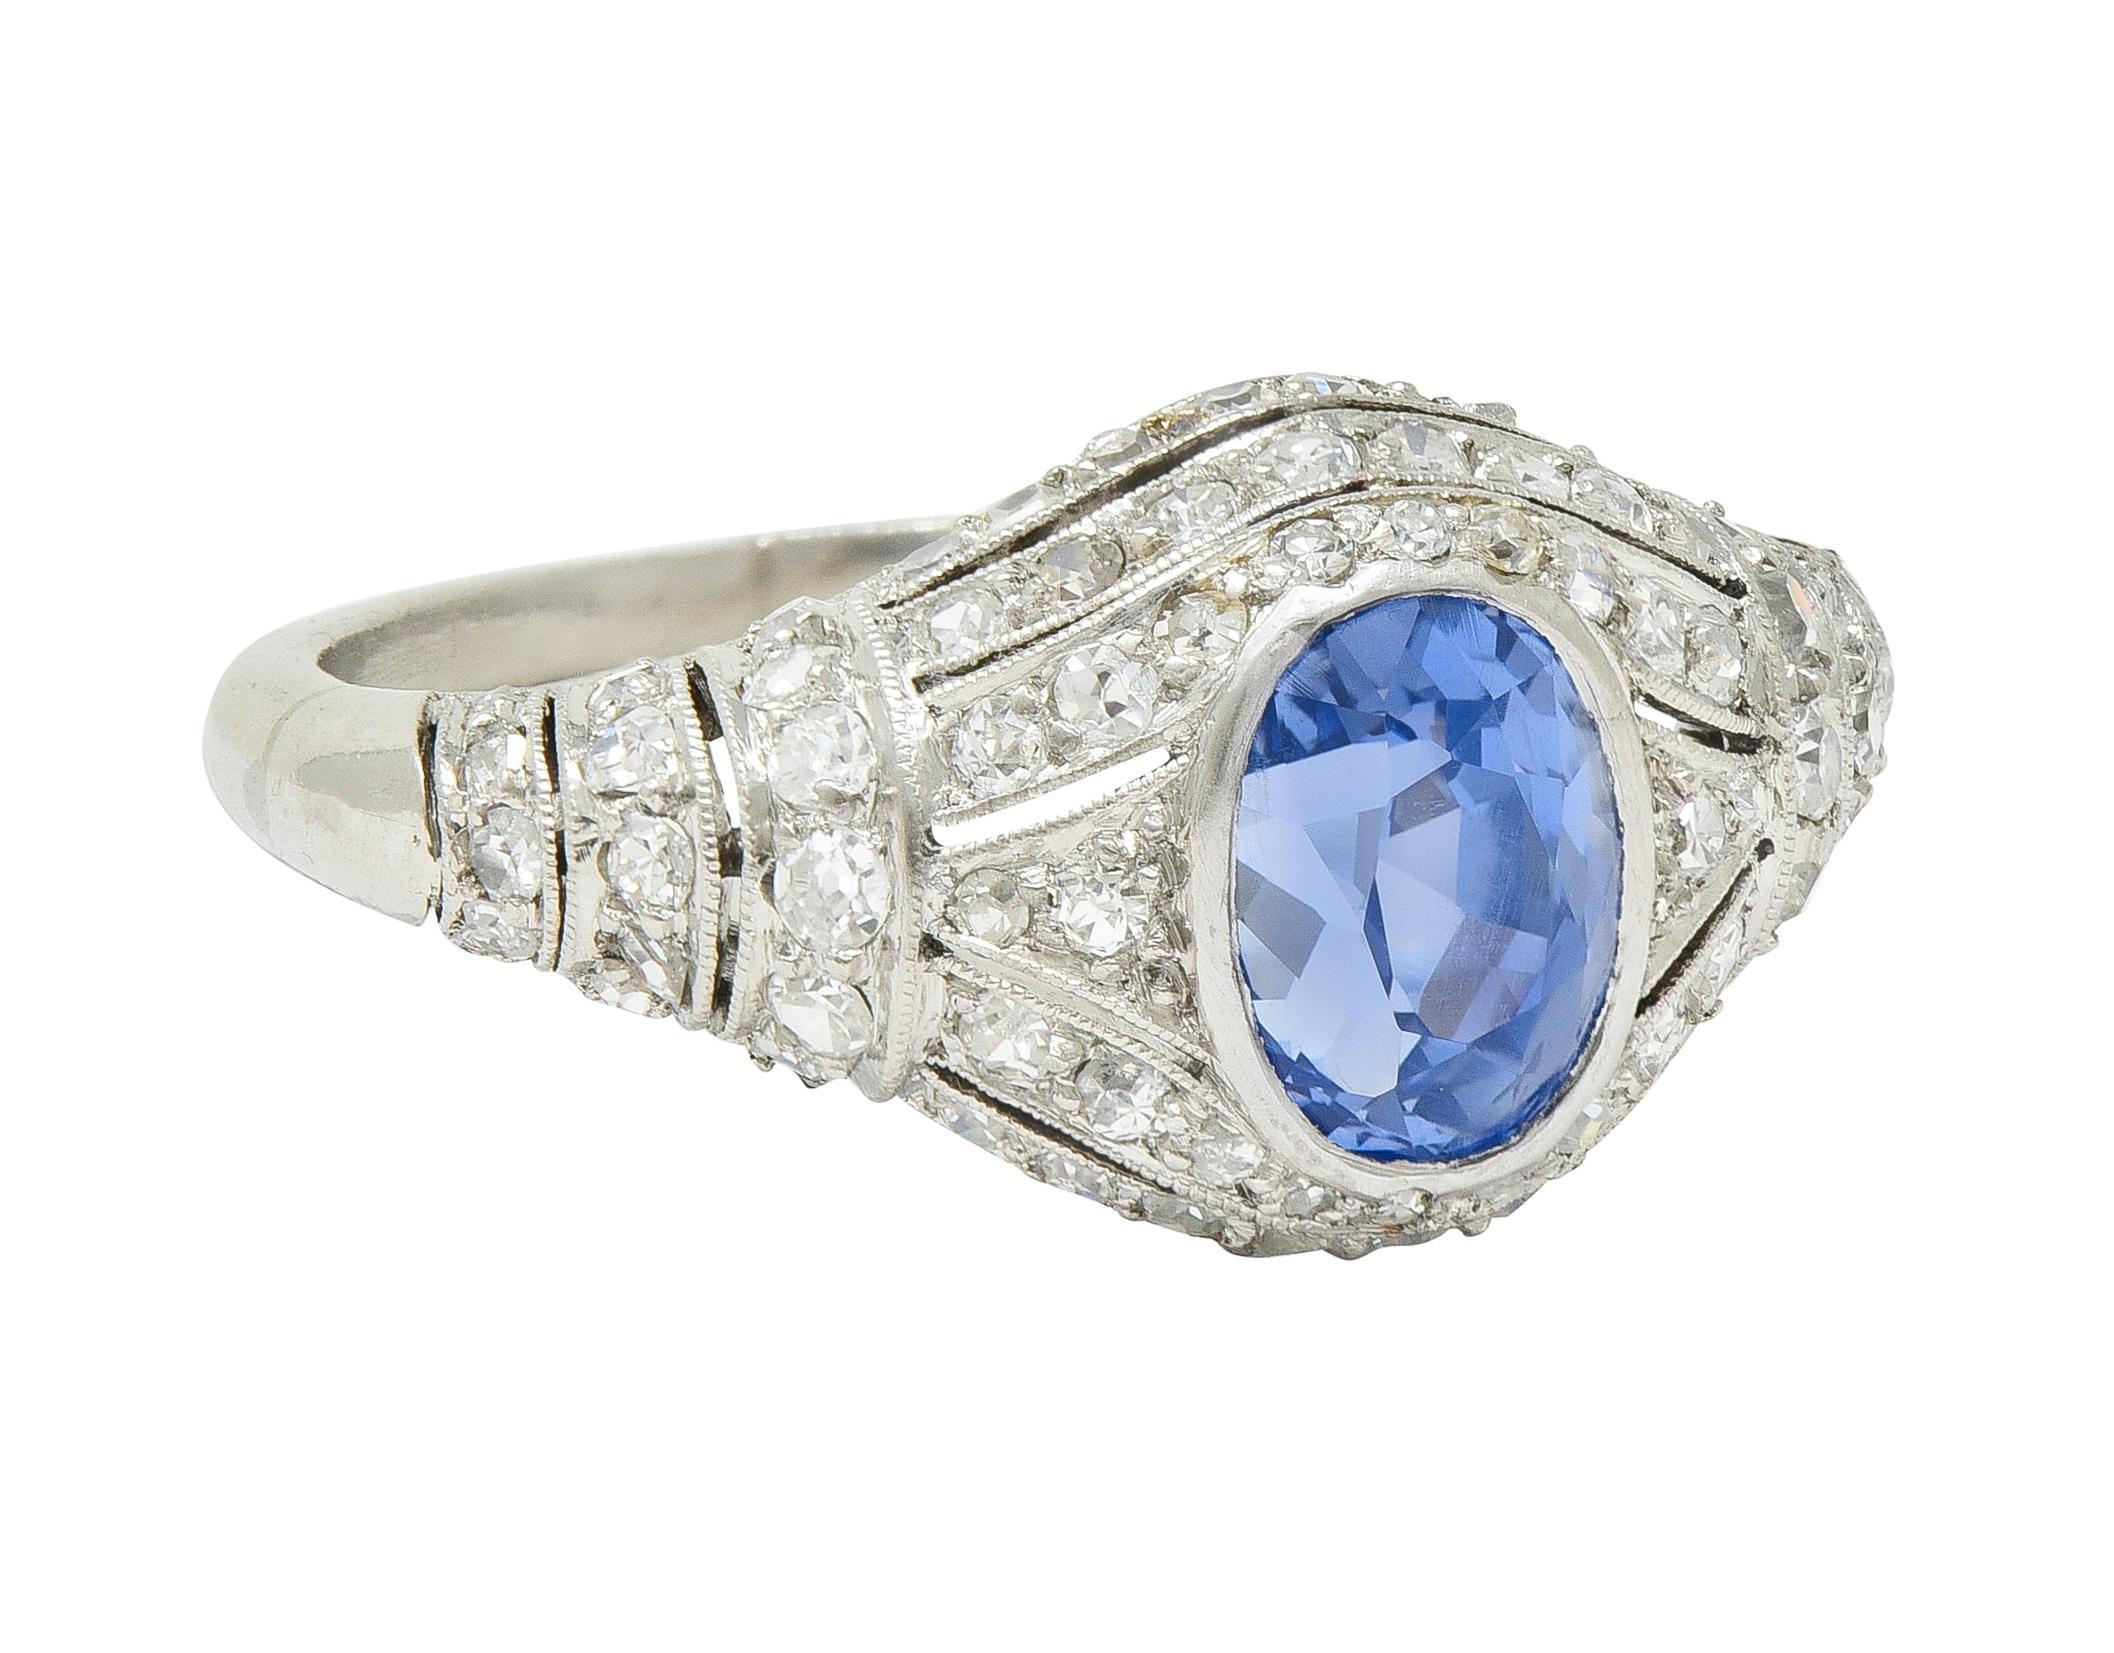 Centering an oval-shaped mixed-cut sapphire weighing 1.70 carats - transparent cornflower blue in color 
Natural Sri Lankan in origin with no indications of heat treatment - bezel set
With a pierced bombé-shaped surround with rows of single cut